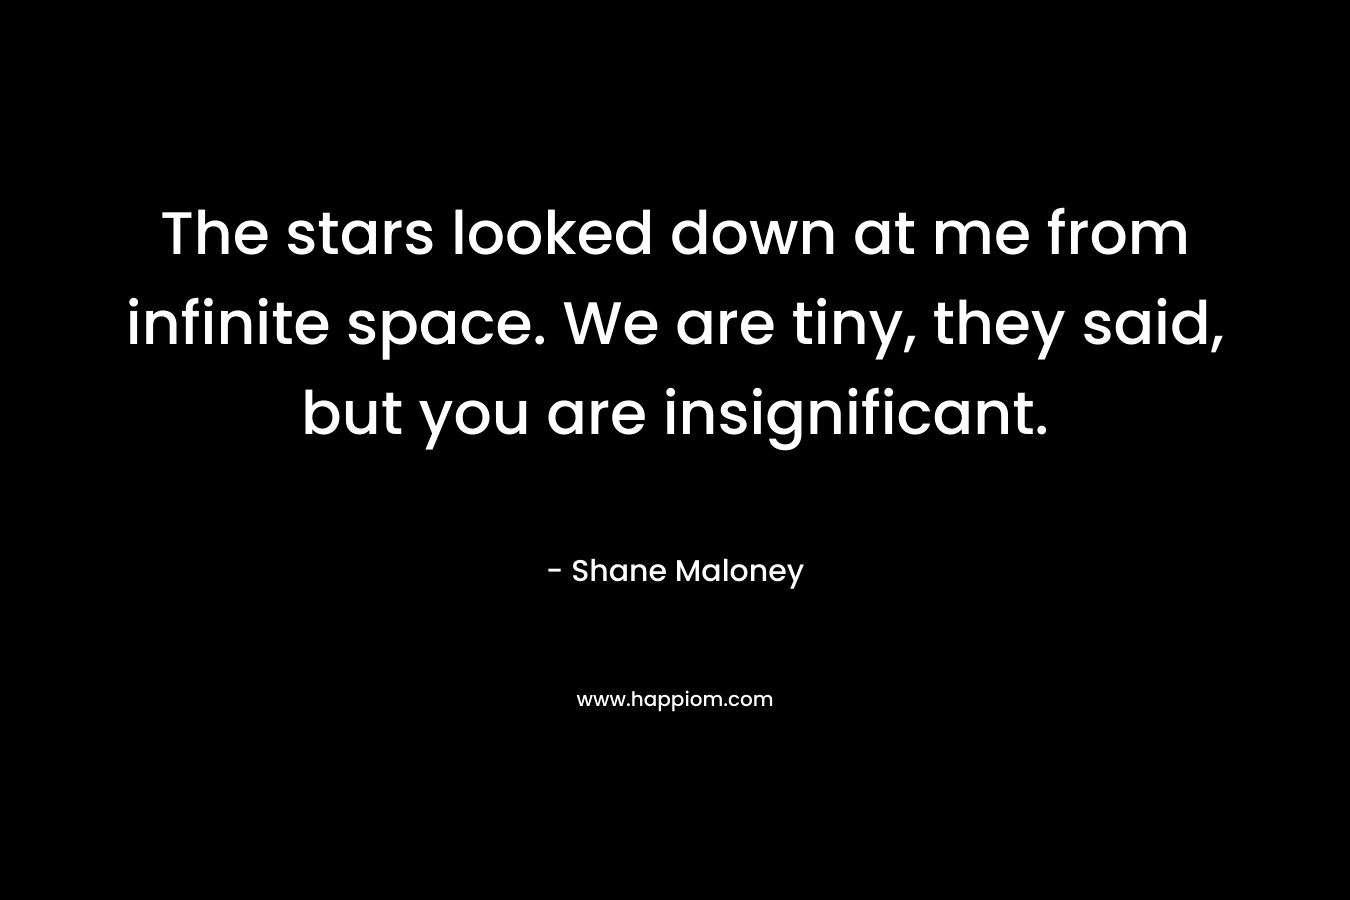 The stars looked down at me from infinite space. We are tiny, they said, but you are insignificant. – Shane Maloney